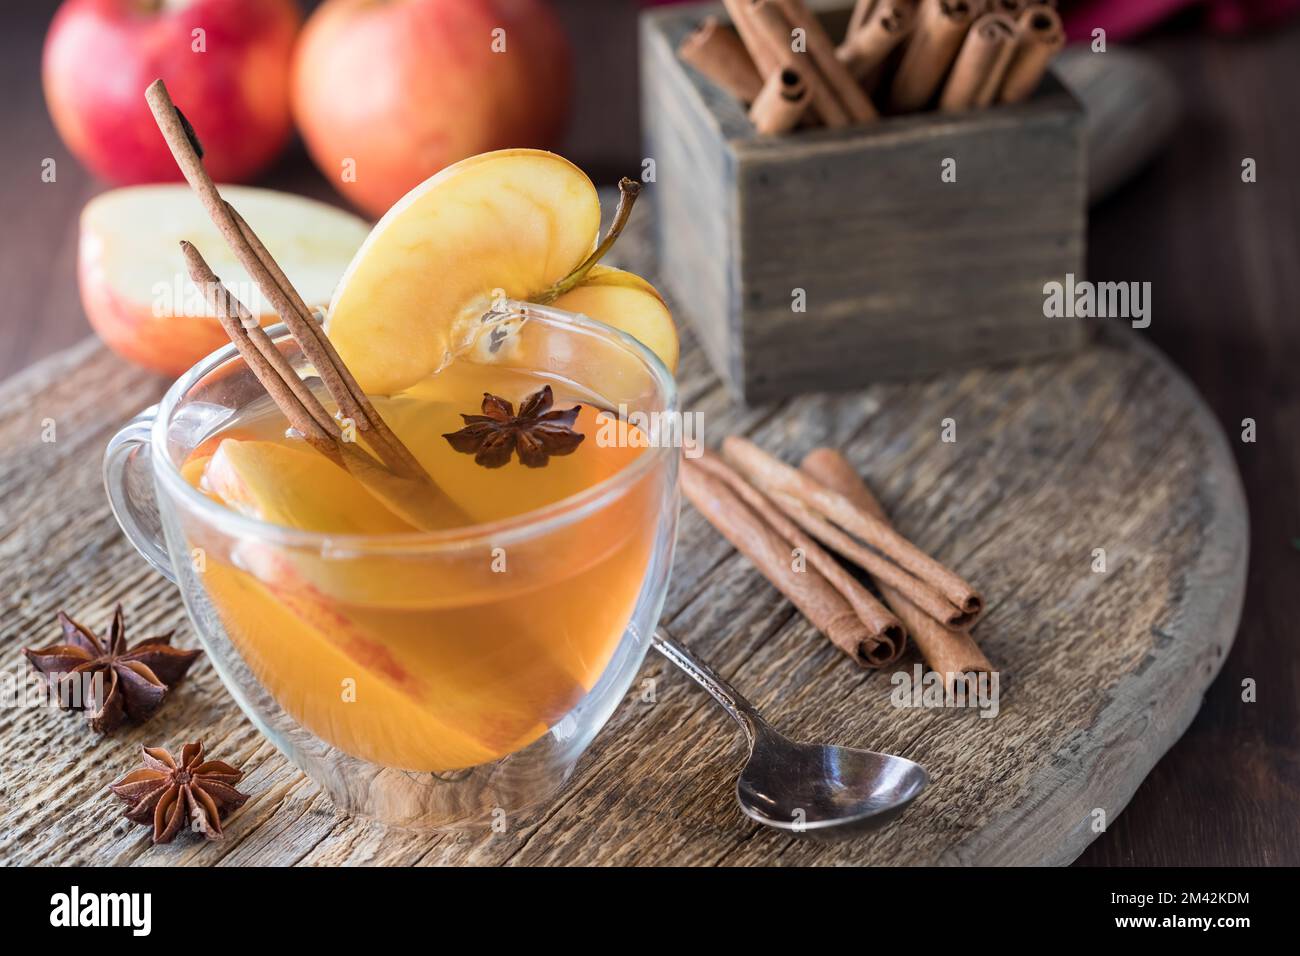 A look into a glass tea cup of homemade mulled apple cider with garnishments. Stock Photo